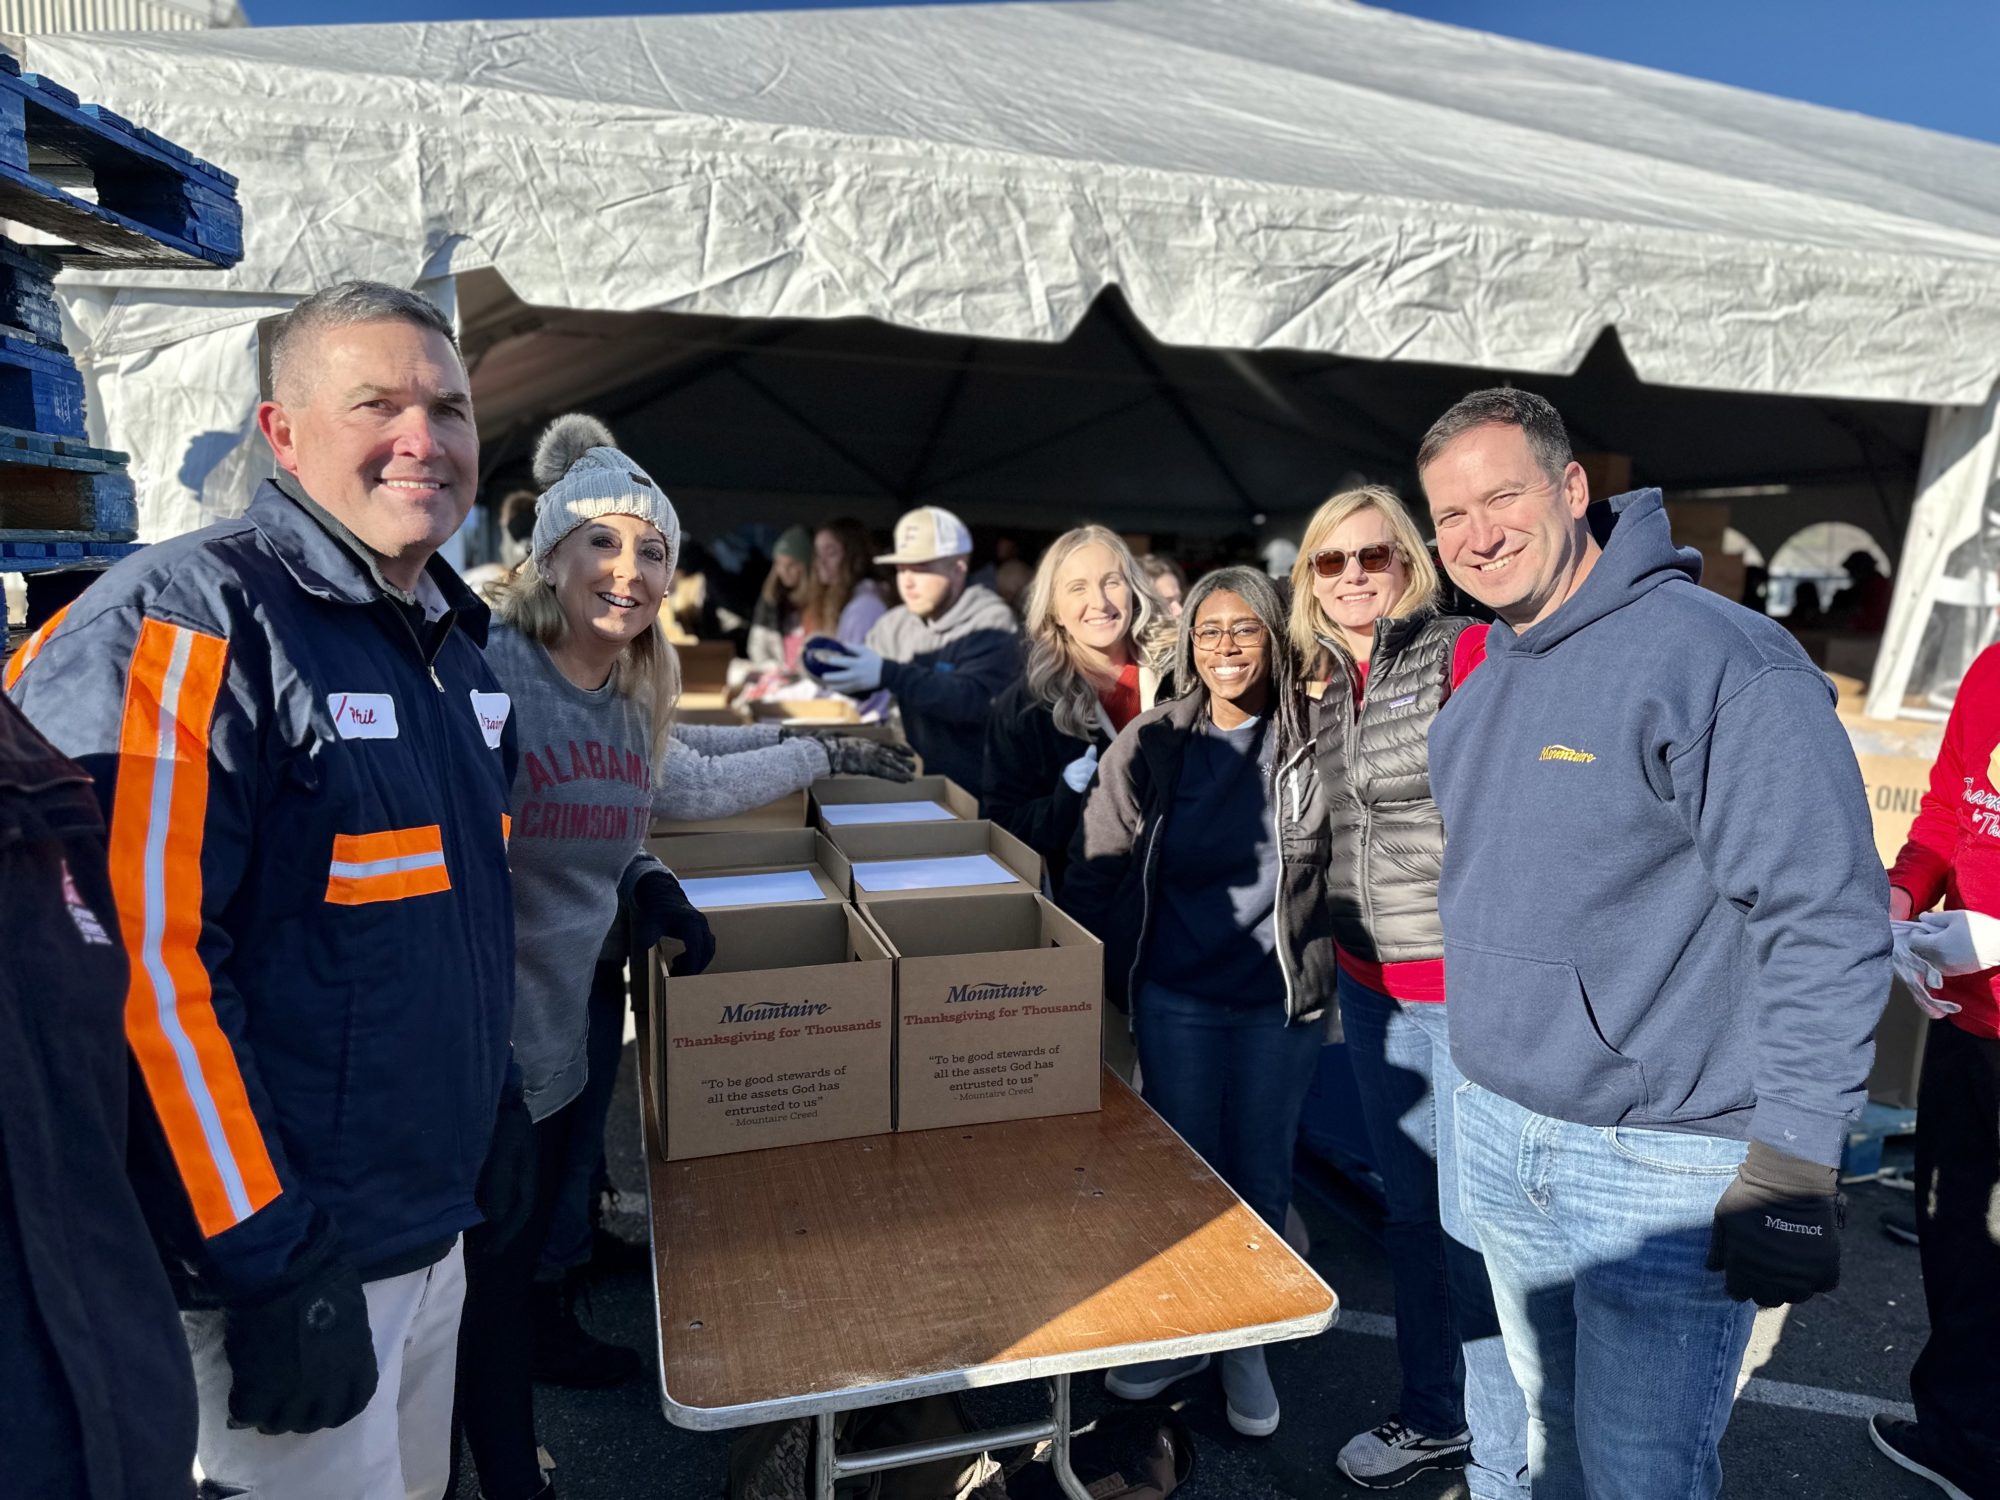 12,000 boxes packed on Delmarva to feed families at Thanksgiving